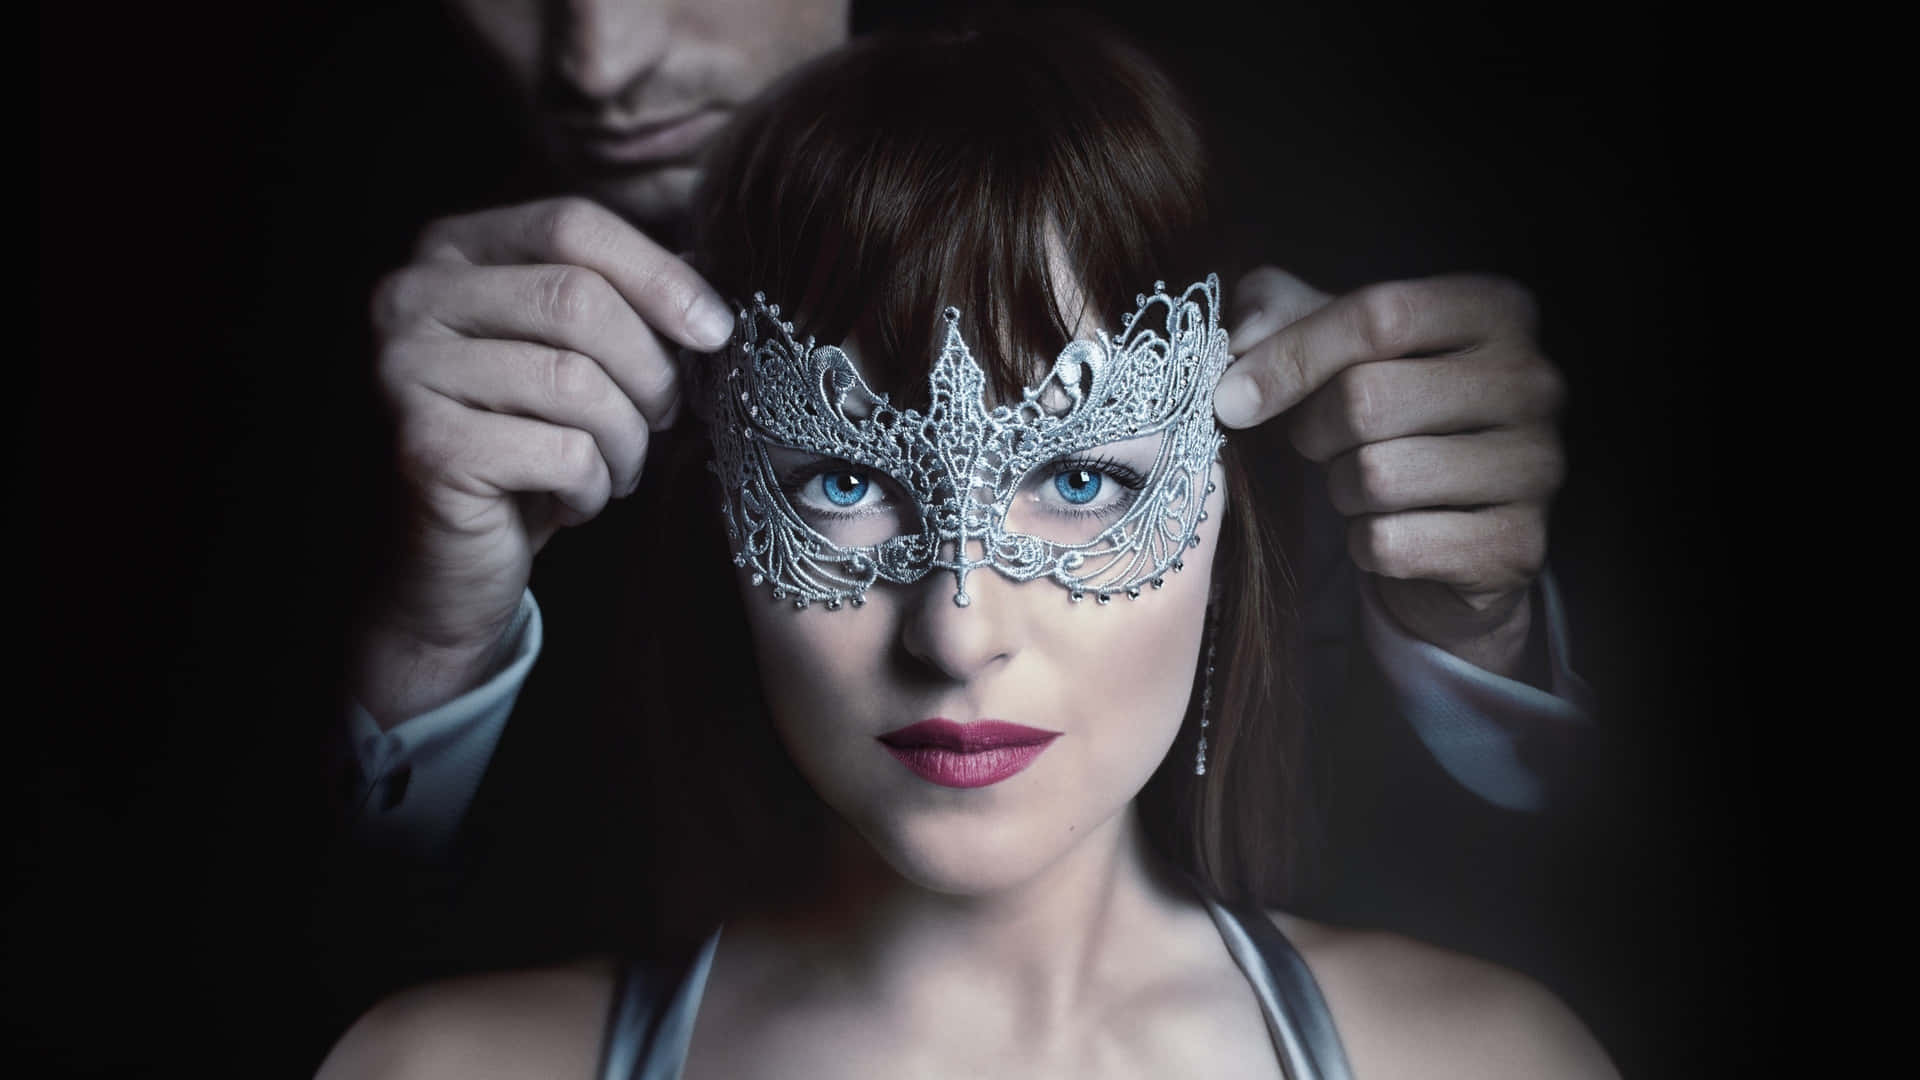 Anastasia With Mask From Fifty Shades Of Grey